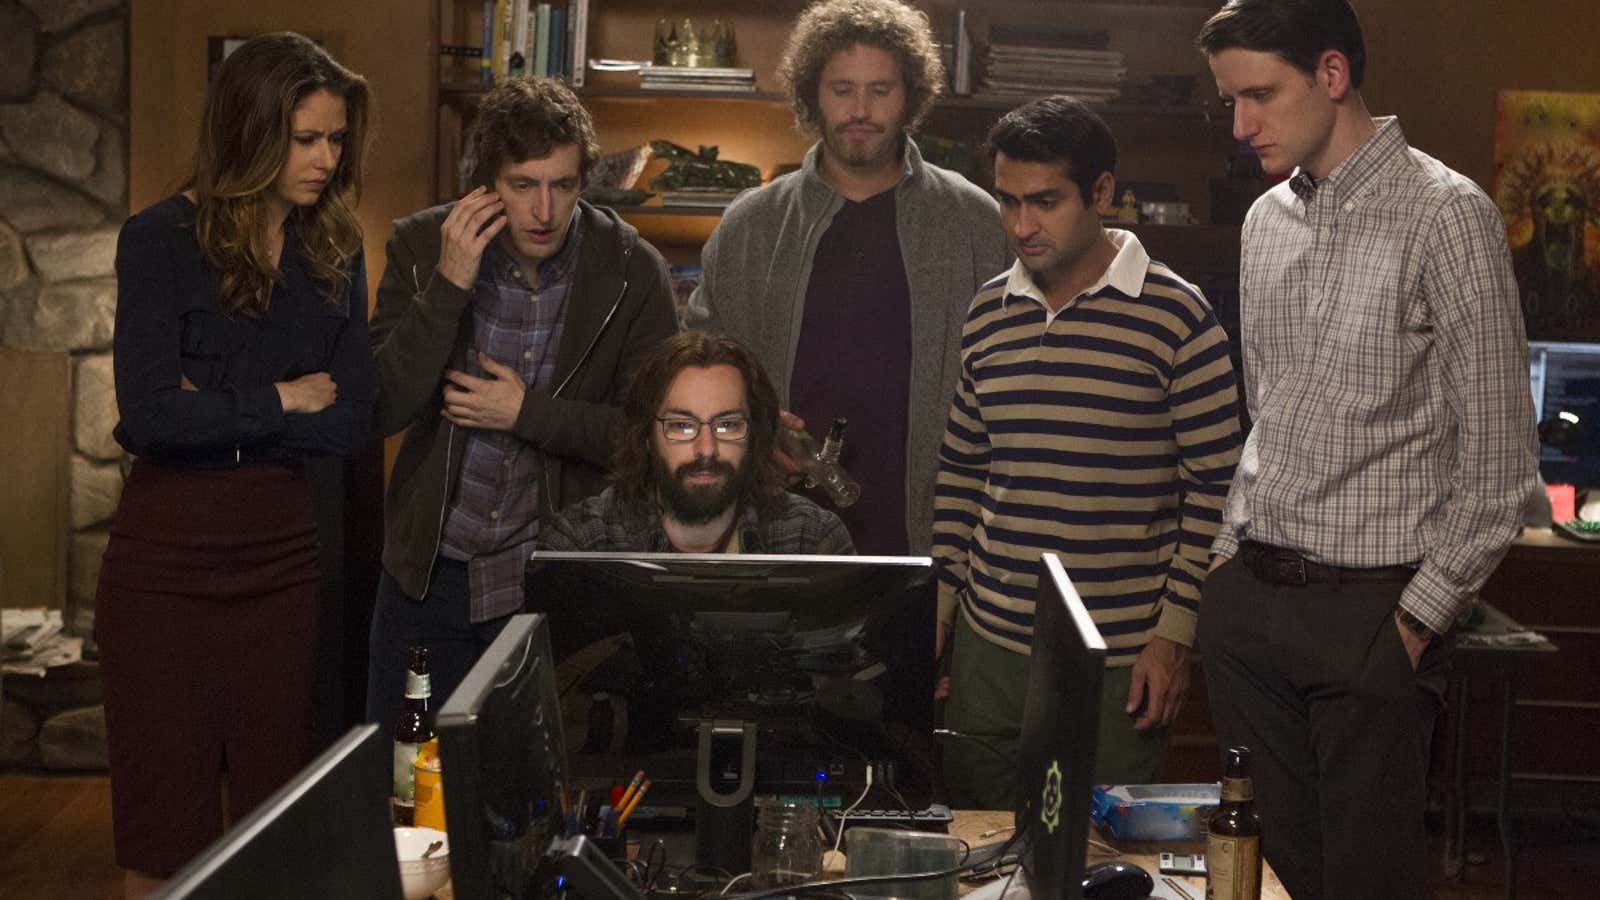 Google’s neural network compression could come right out of an episode of HBO’s Silicon Valley.